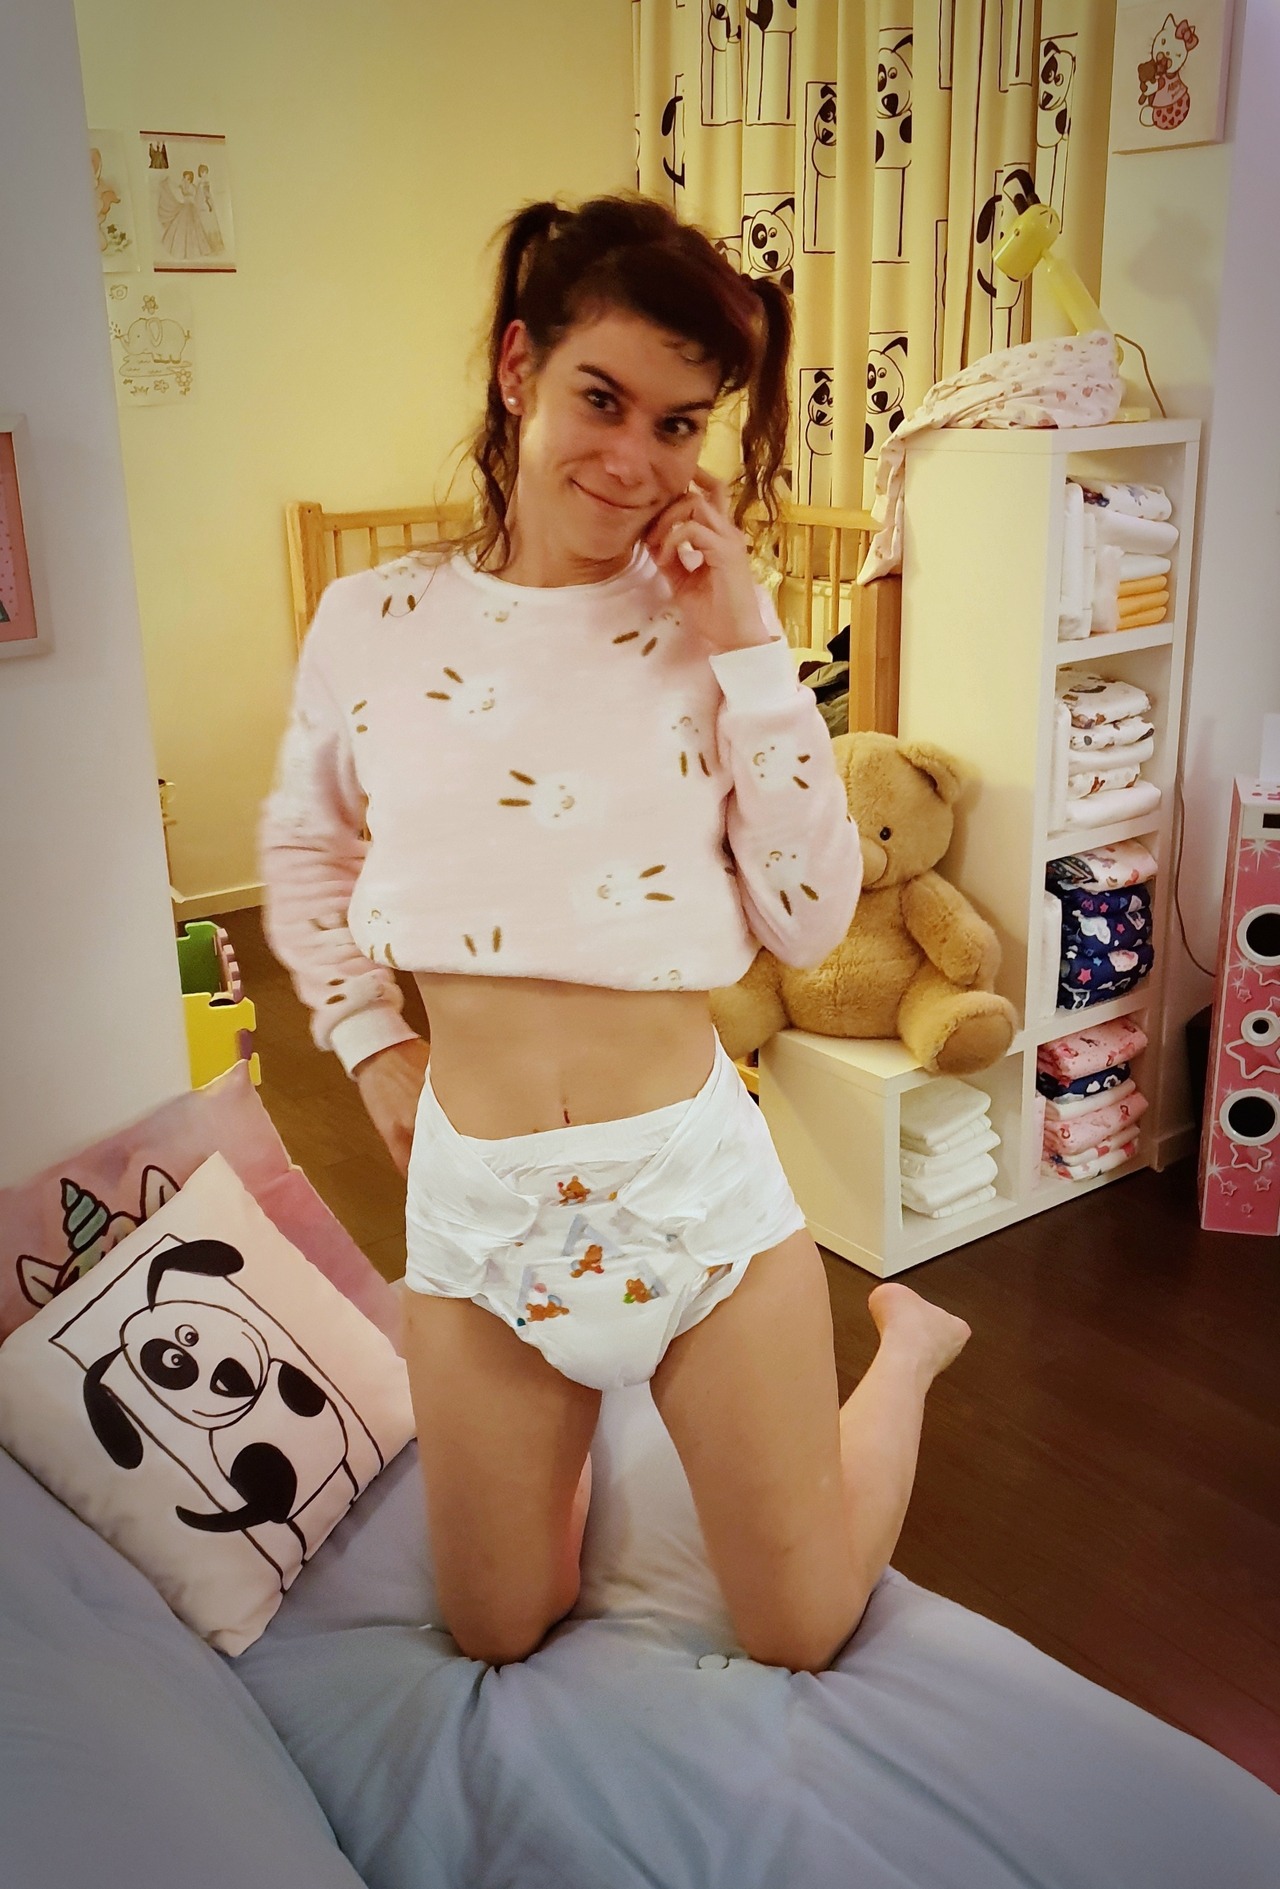 Diapers - Teen diaper girls abhunnies - Porn pictures